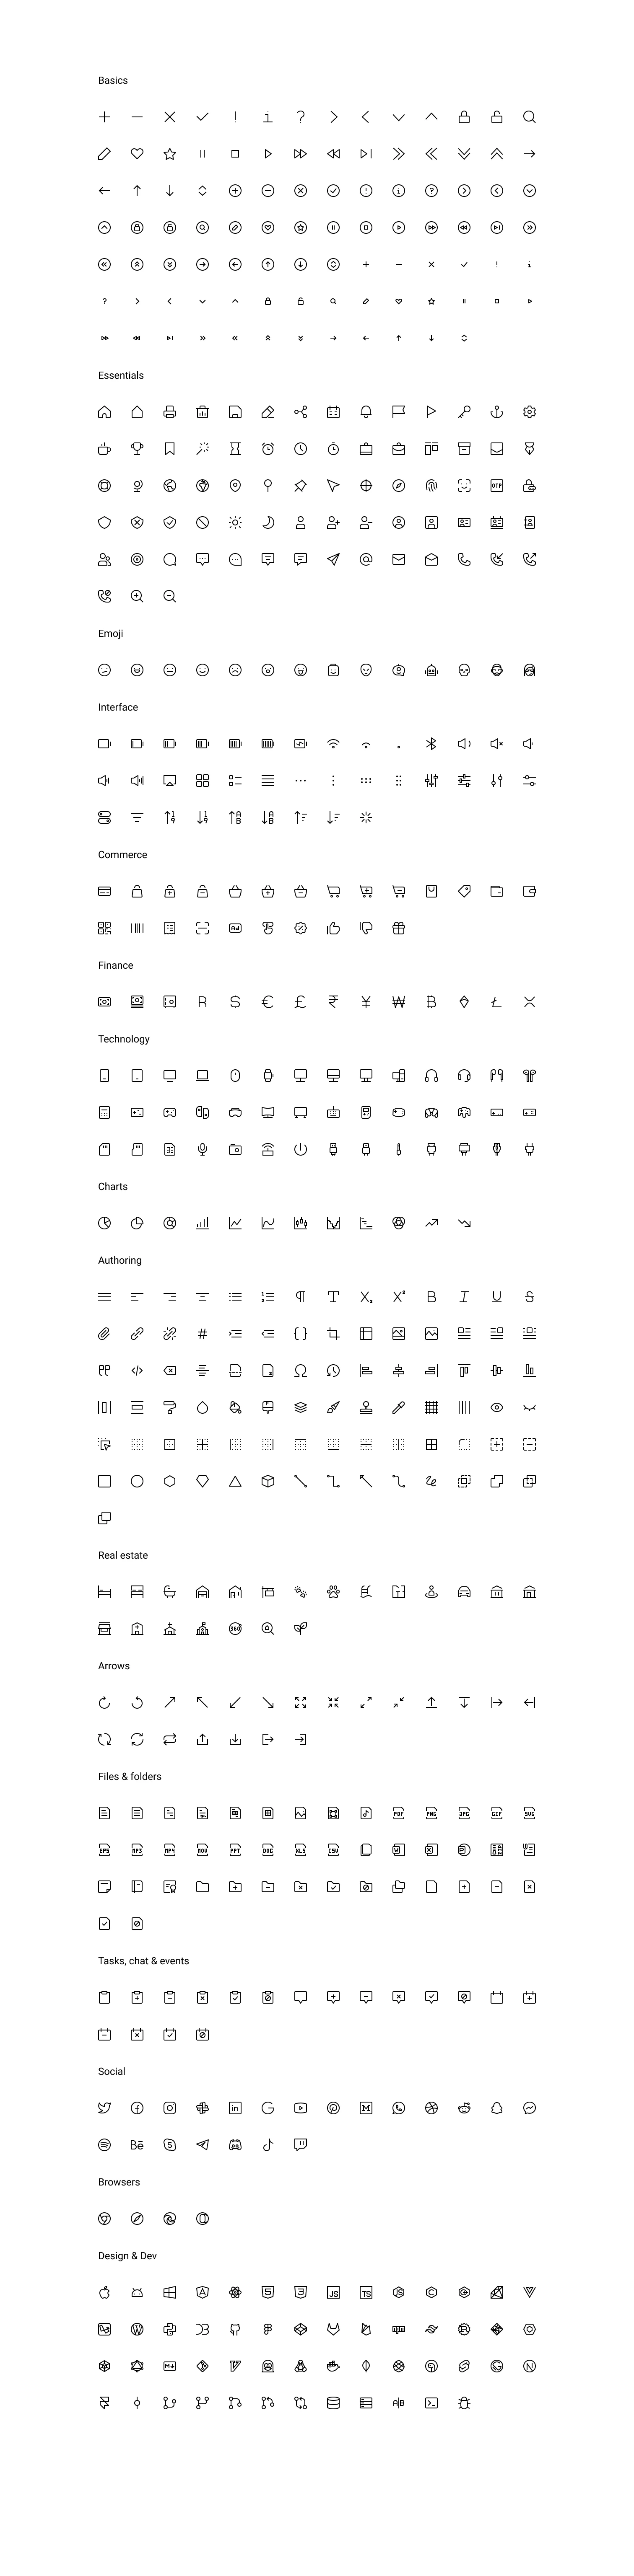 Teenyicons - Free Icon Set for Figma - Teenyicons is an awesome icon set with 1160 free icons both outlined and solid styles. 1px stroke is editable. The extensive library of the icons includes the following categories: Basics, Essentials, Emoji, Interface, Commerce, Technology, Authoring, Real estate, Arrows, Files & folders, Tasks, chat & events, Social, Browsers, Design & Dev.